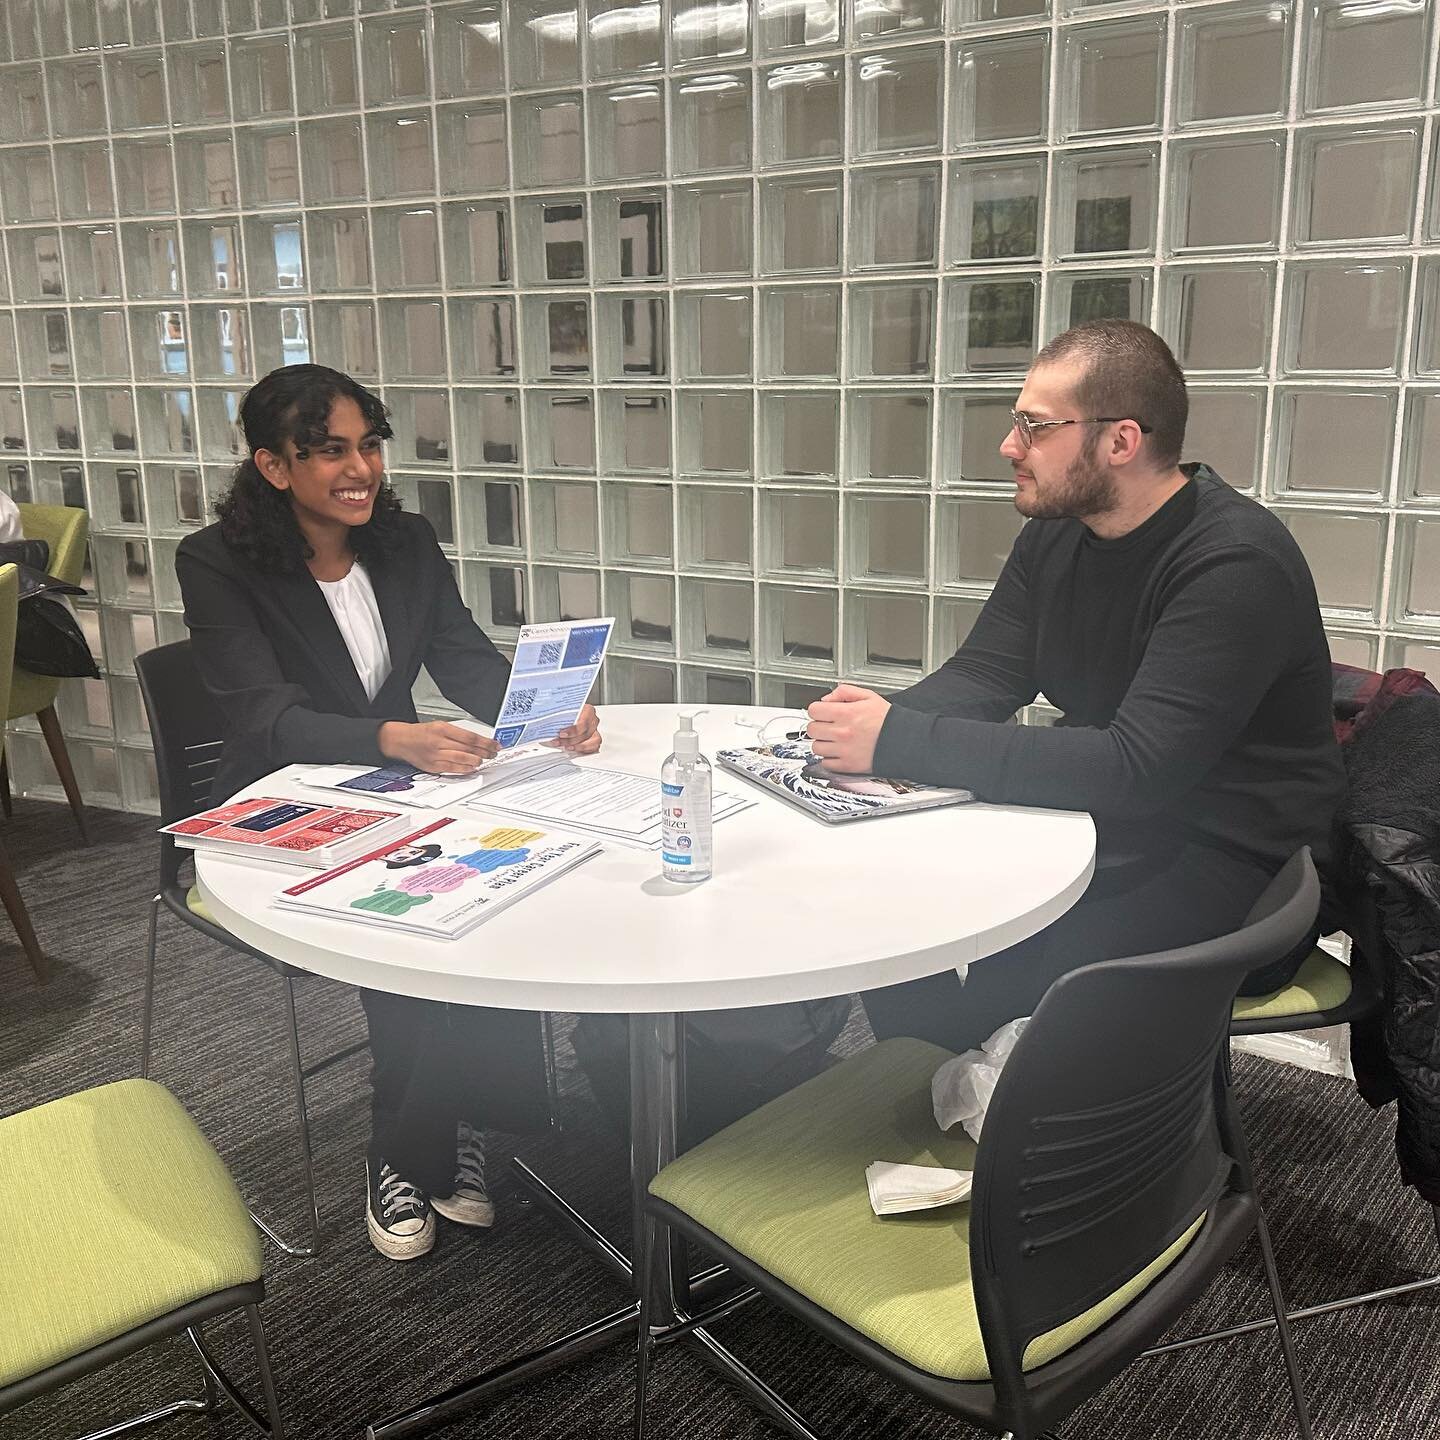 Thanks to everyone who Paused 📒📚 and Posed 📸 with us on Thursday! Huge shout-out to @penncareerserv for helping to organize this! Make sure to be on the lookout for a Part 2 of this event in the spring semester and other events in the coming weeks